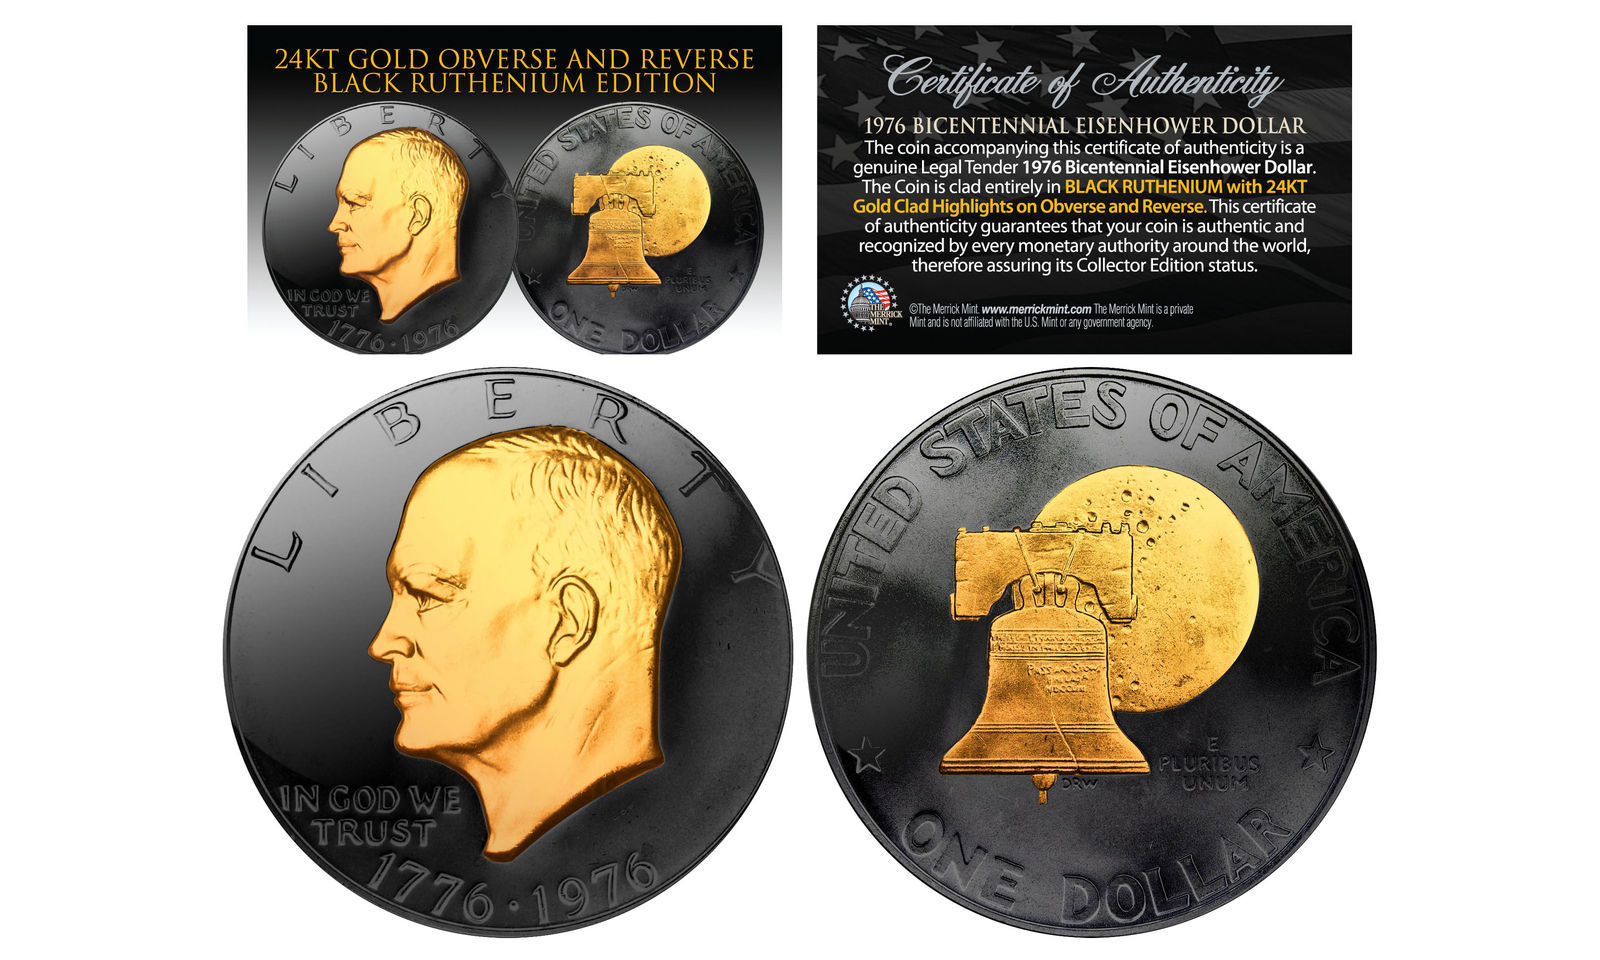 Primary image for 1976 BLACK RUTHENIUM Bicentennial Eisenhower Dollar w/ 24K GOLD features 2-Sided